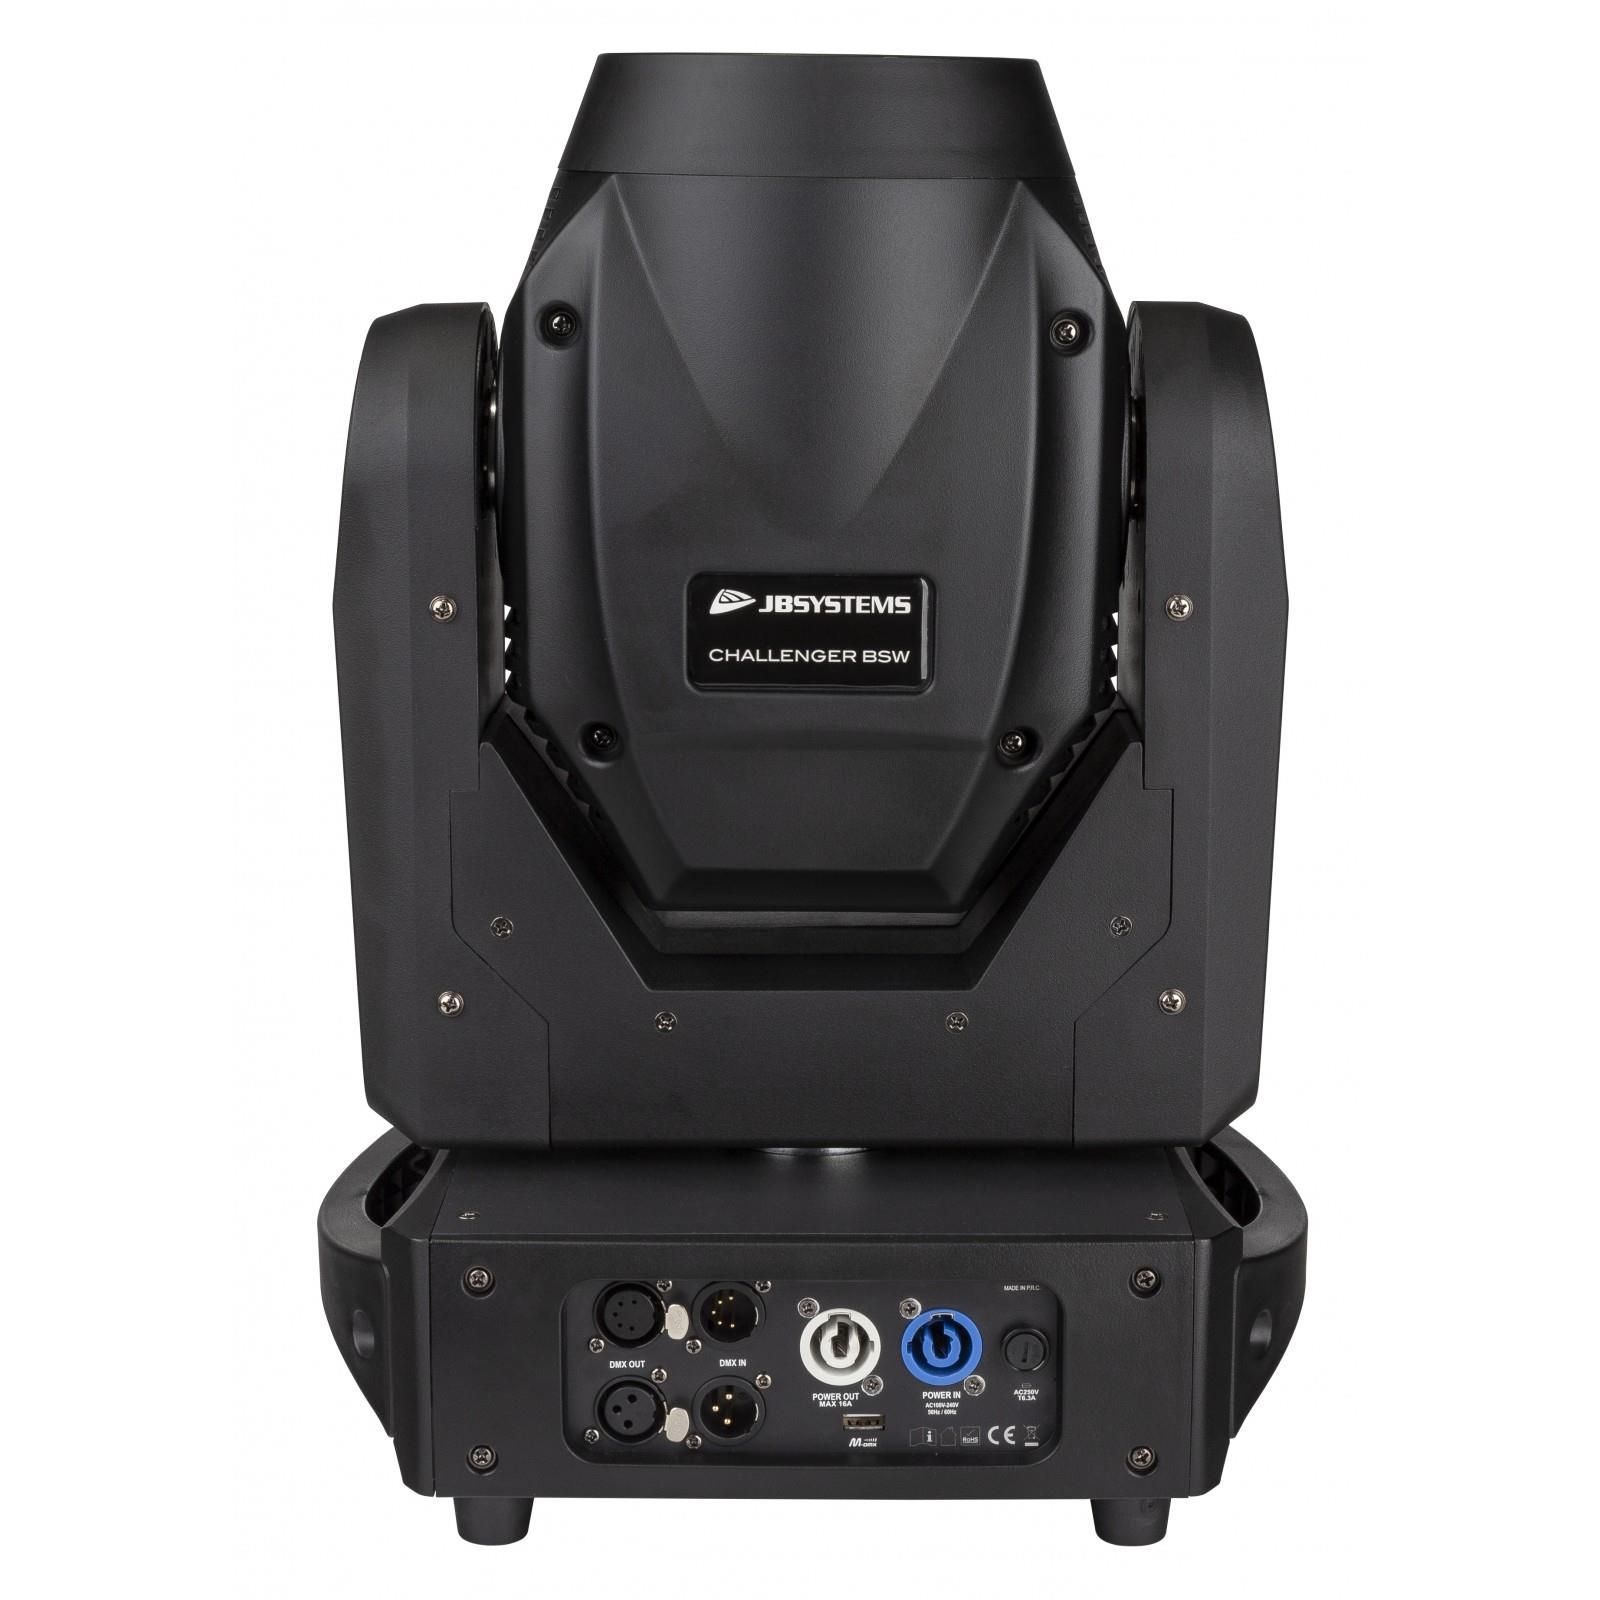 MOVING HEAD JB SYSTEMS CHALLENGER BSW